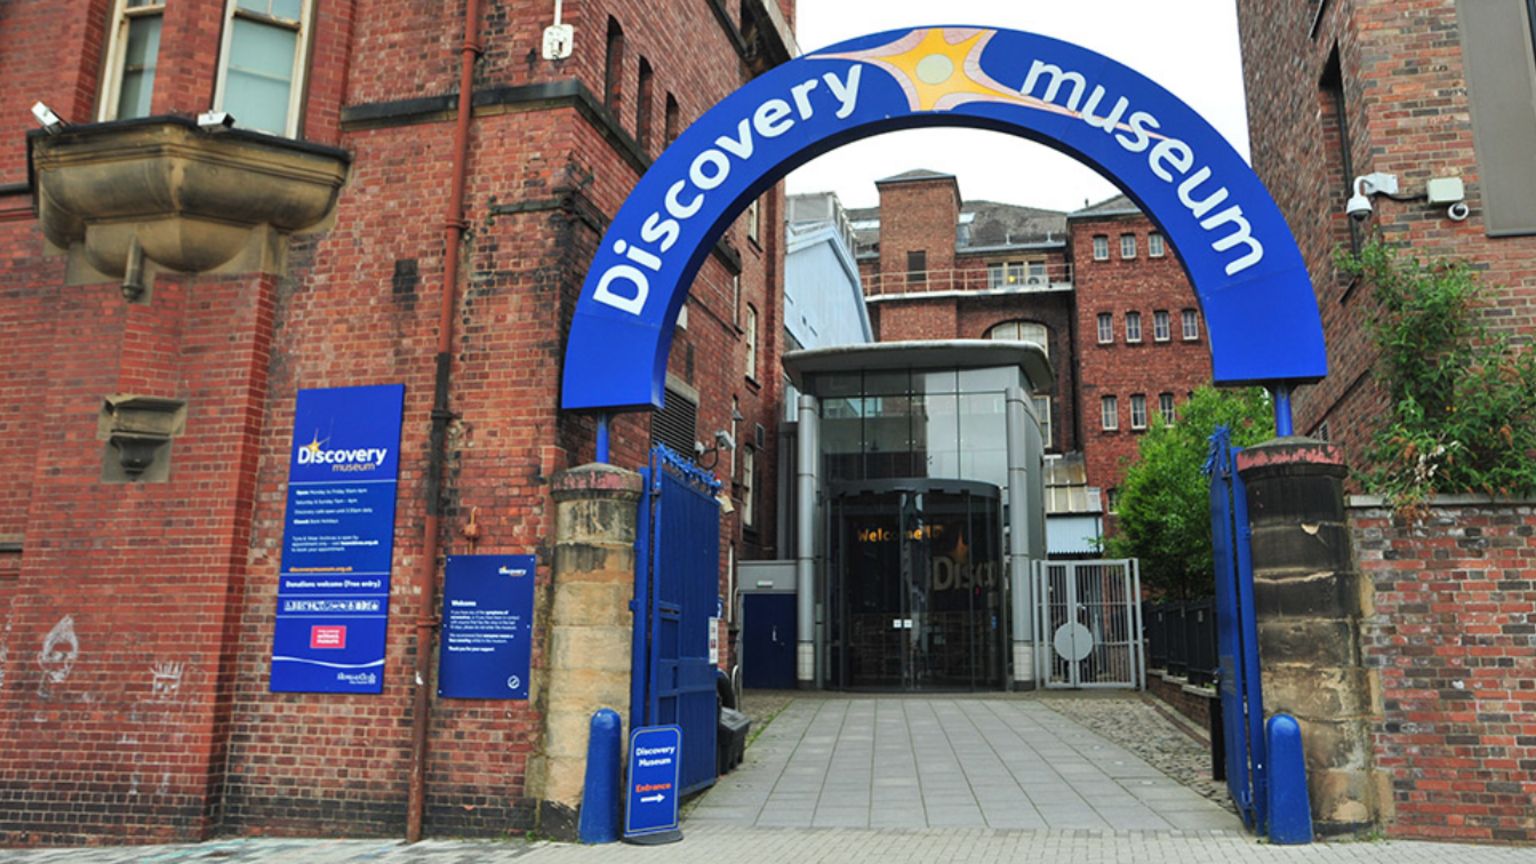 Discovery Museum, Newcastle